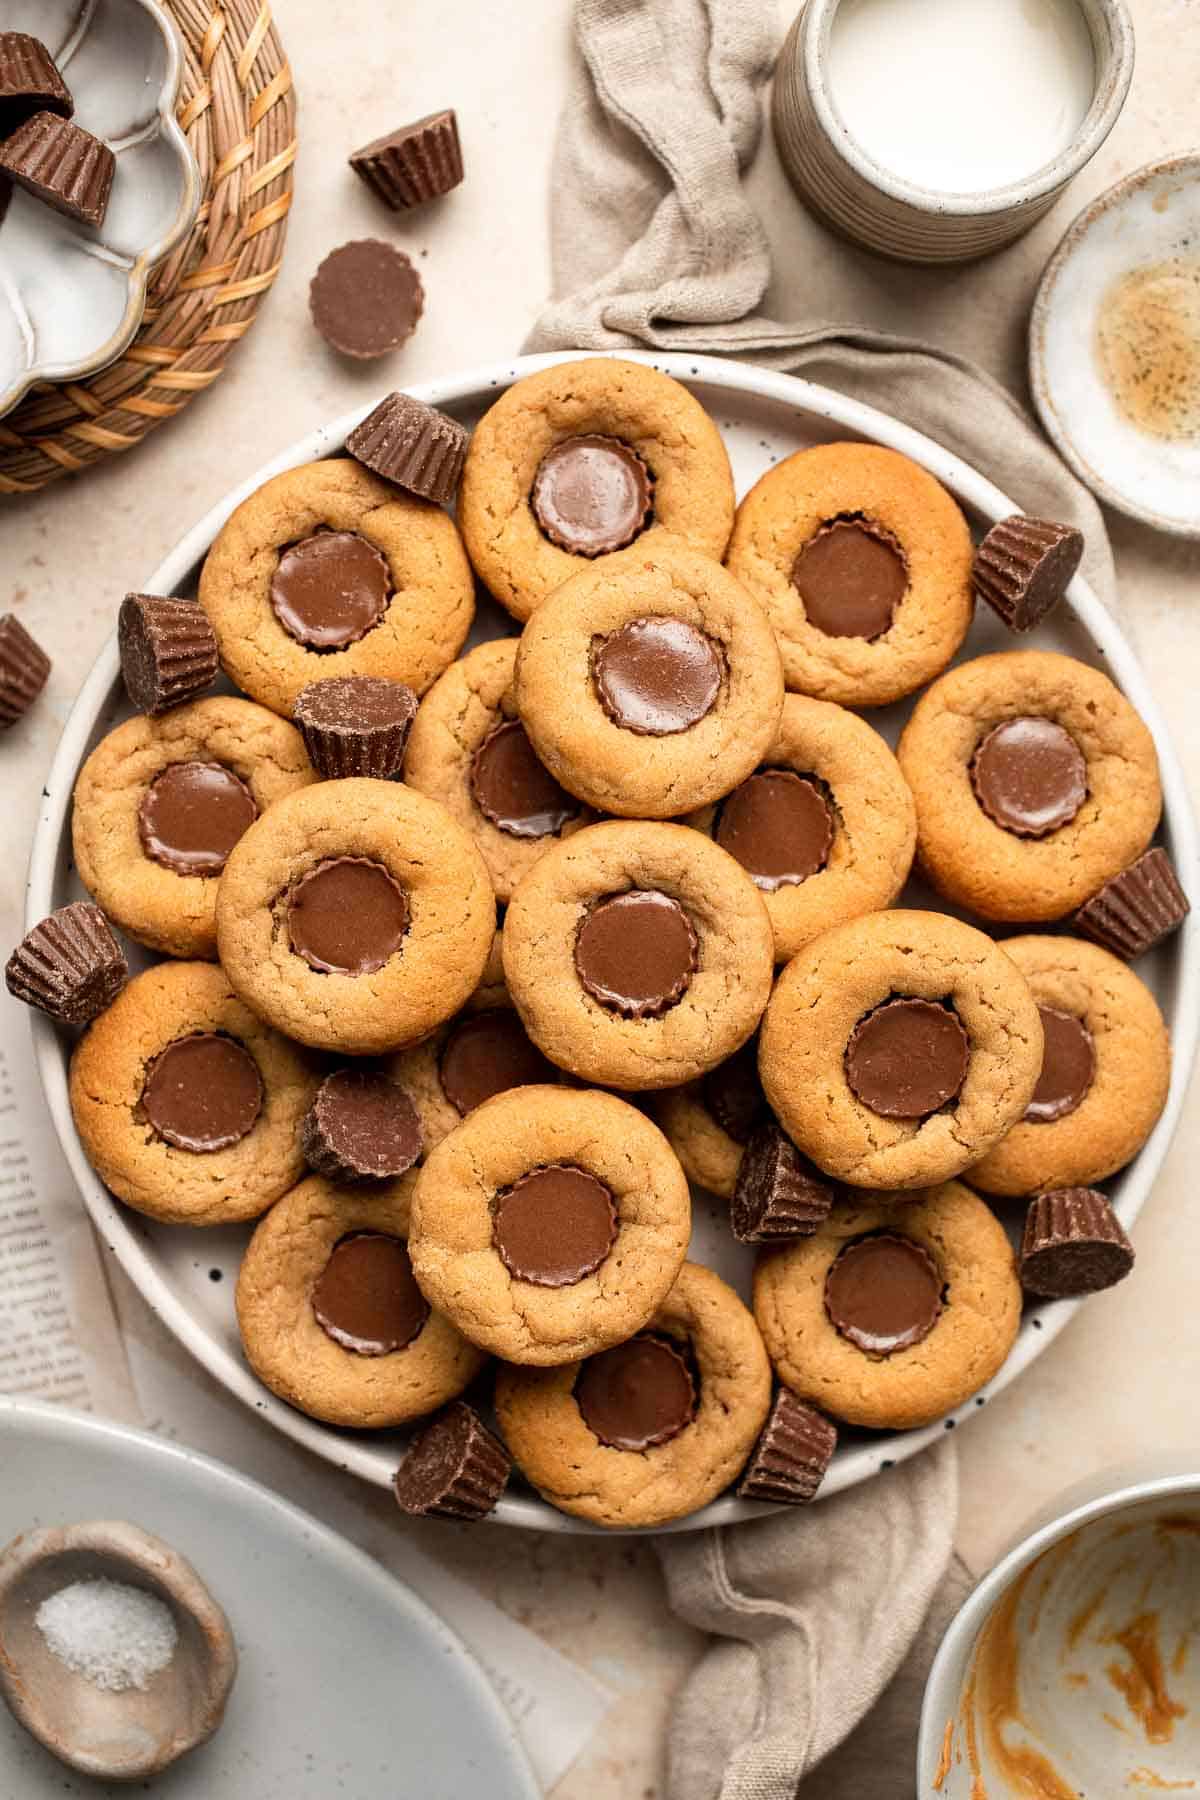 Easy Peanut Butter Cup Cookies are tall and thick, classic Christmas cookies made with peanut butter cookie dough and a mini Reese's cup pressed in. | aheadofthyme.com